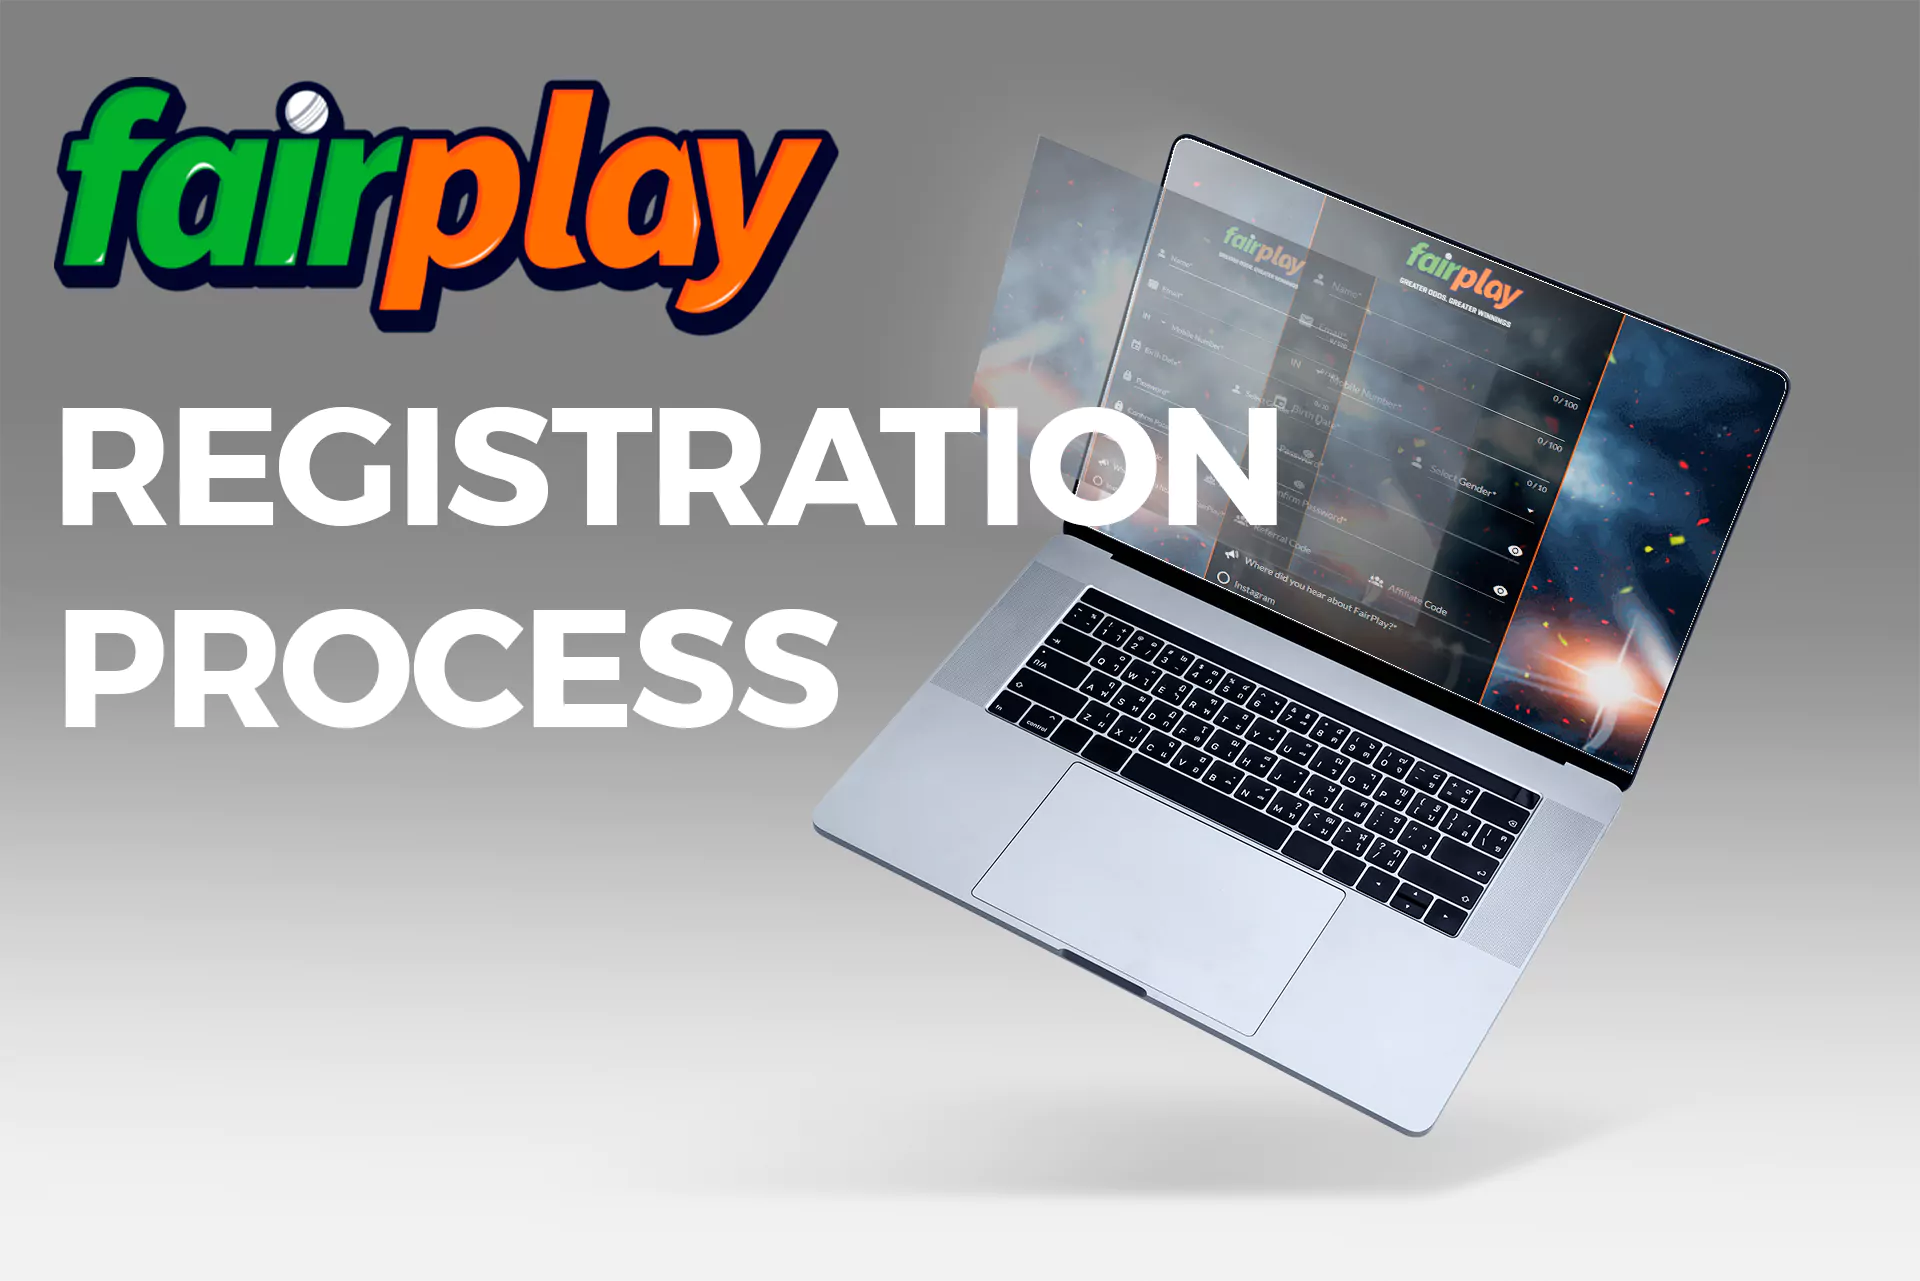 Sign up for Fairplay to bet on cricket and other sports.